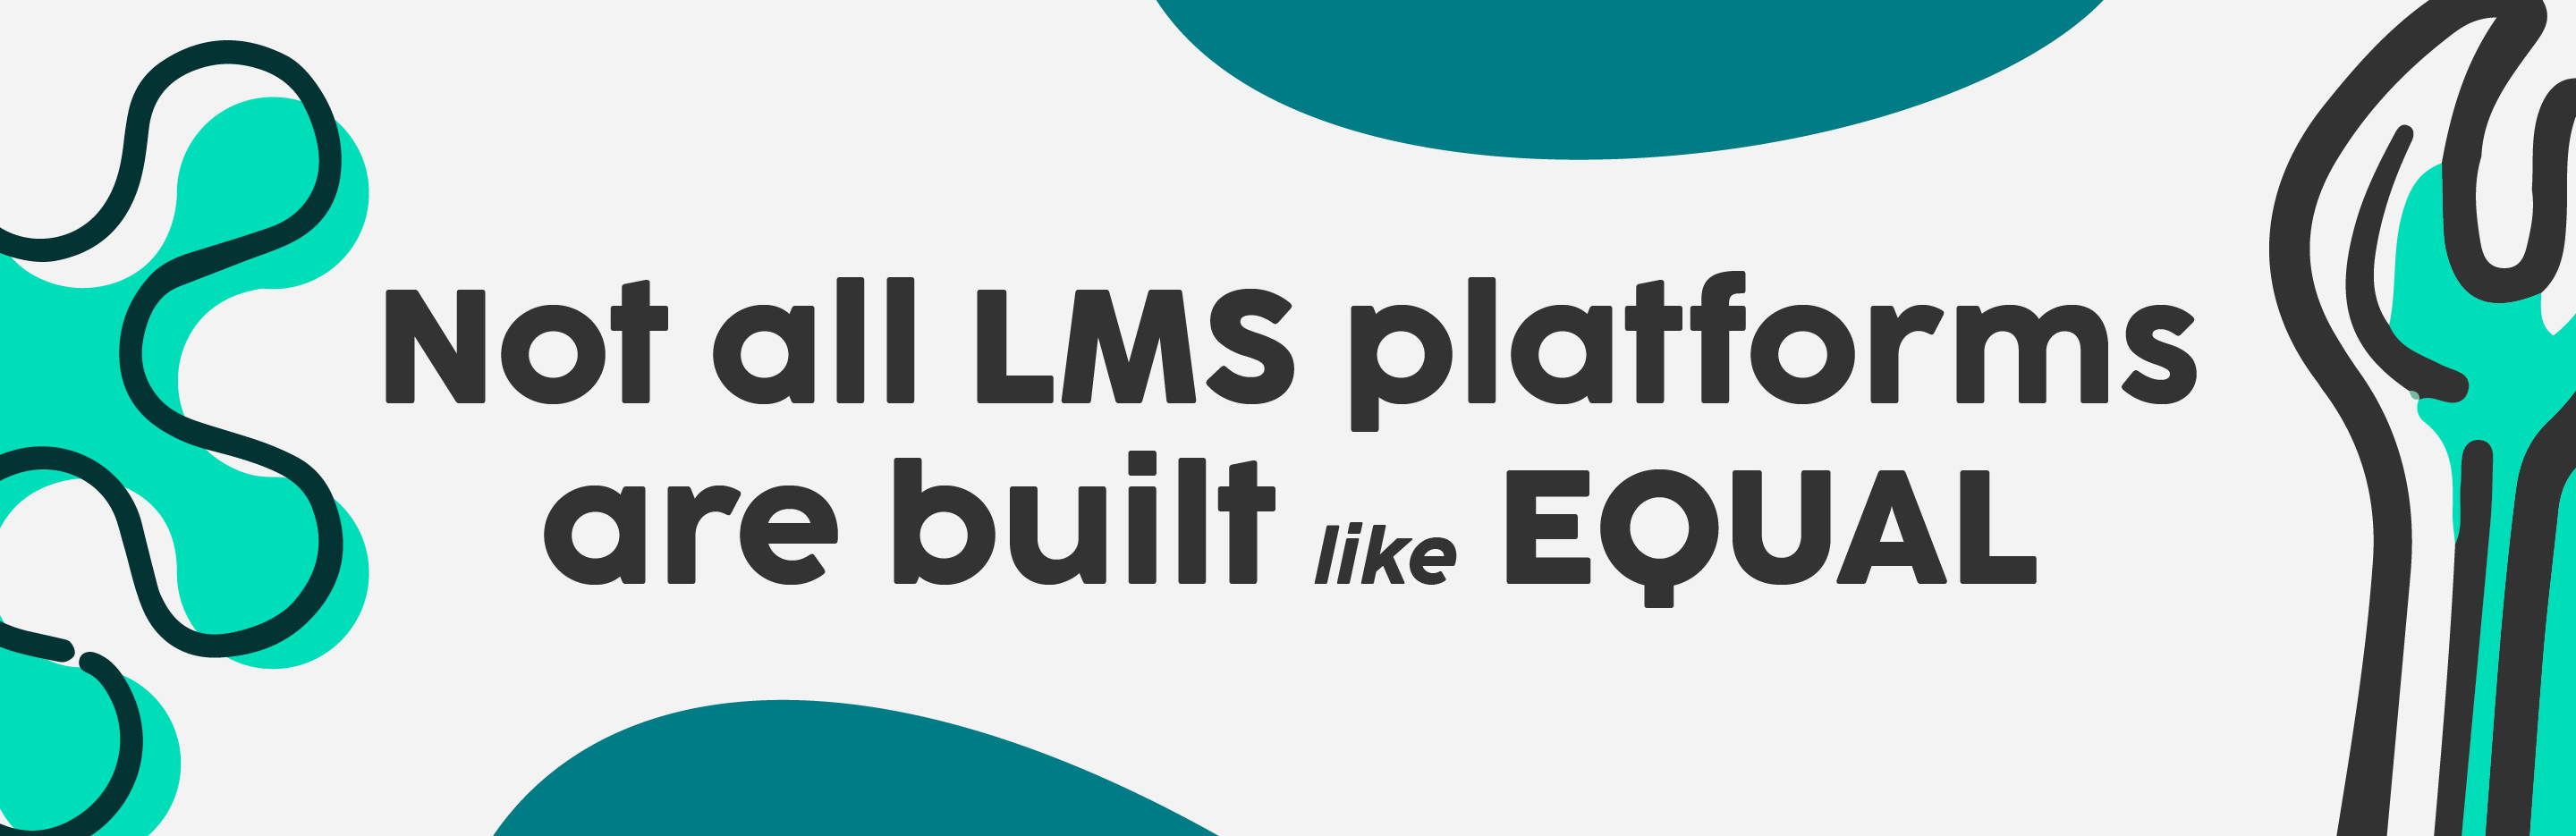 not all LMS platforms are built like EQUAL